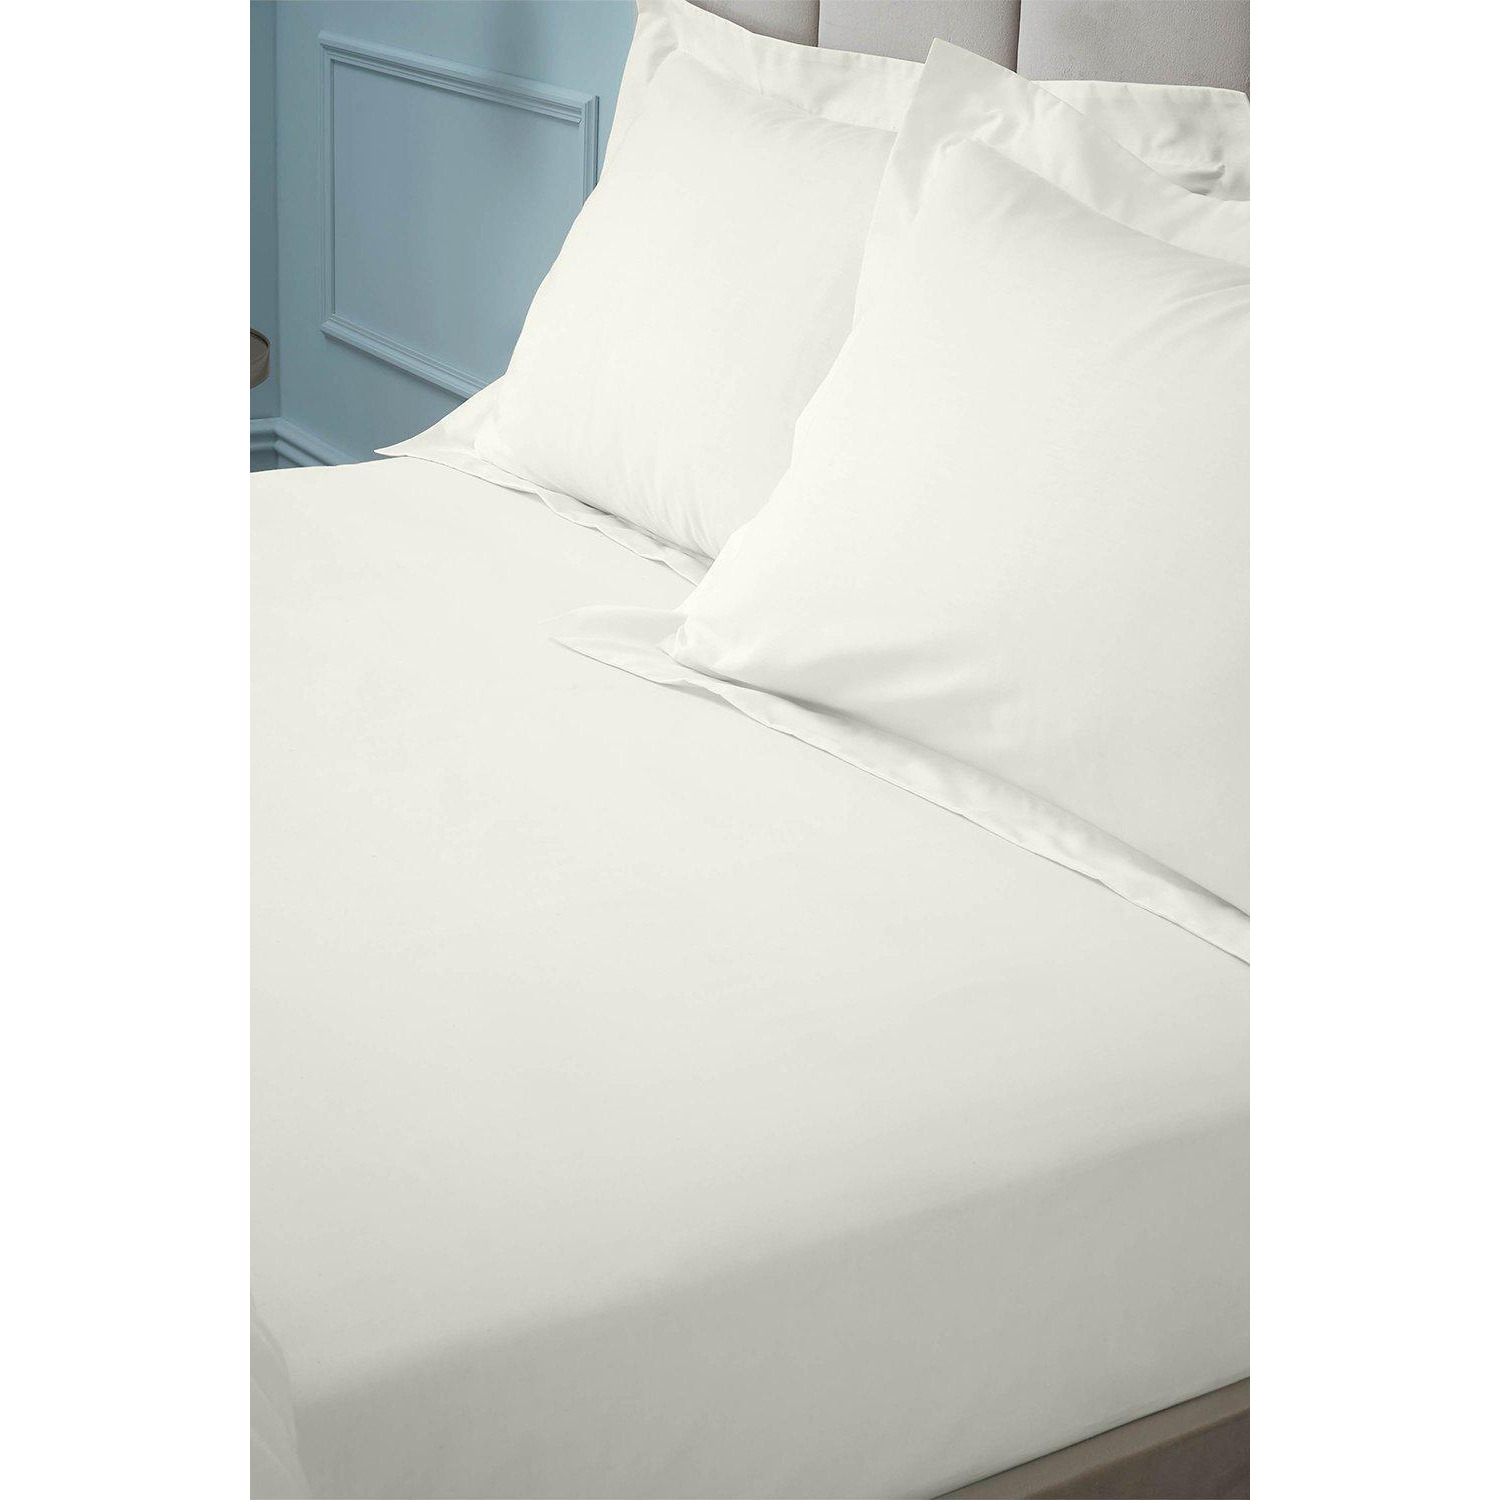 '180 Thread Count Egyptian Cotton' Fitted Sheet - image 1